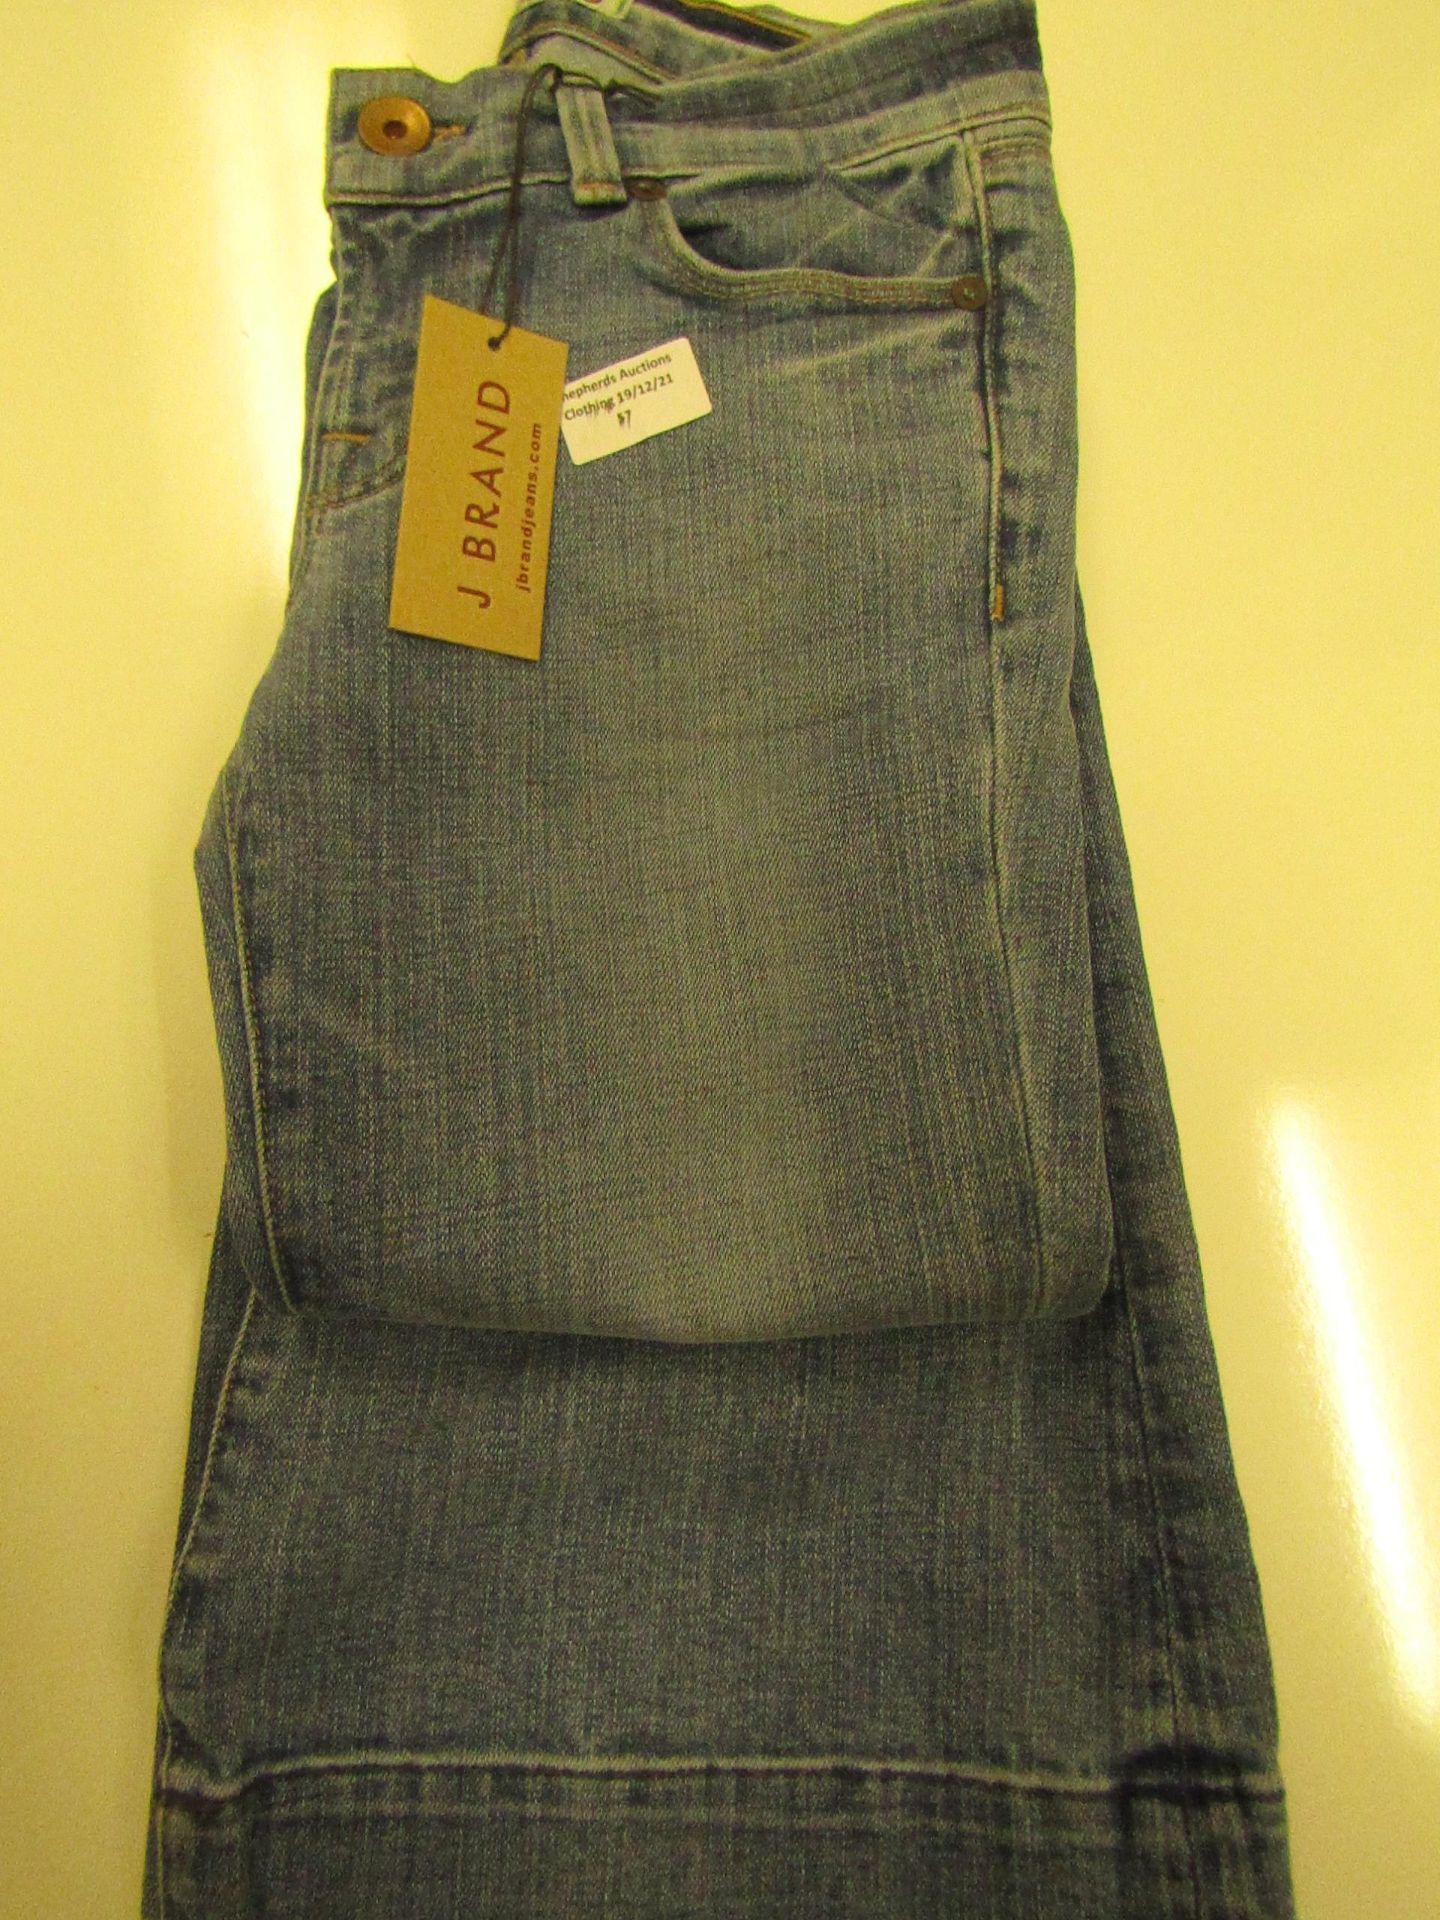 J Brand Slim Fit Love Story Bell Bottom Jeans size 8 new with tag see image